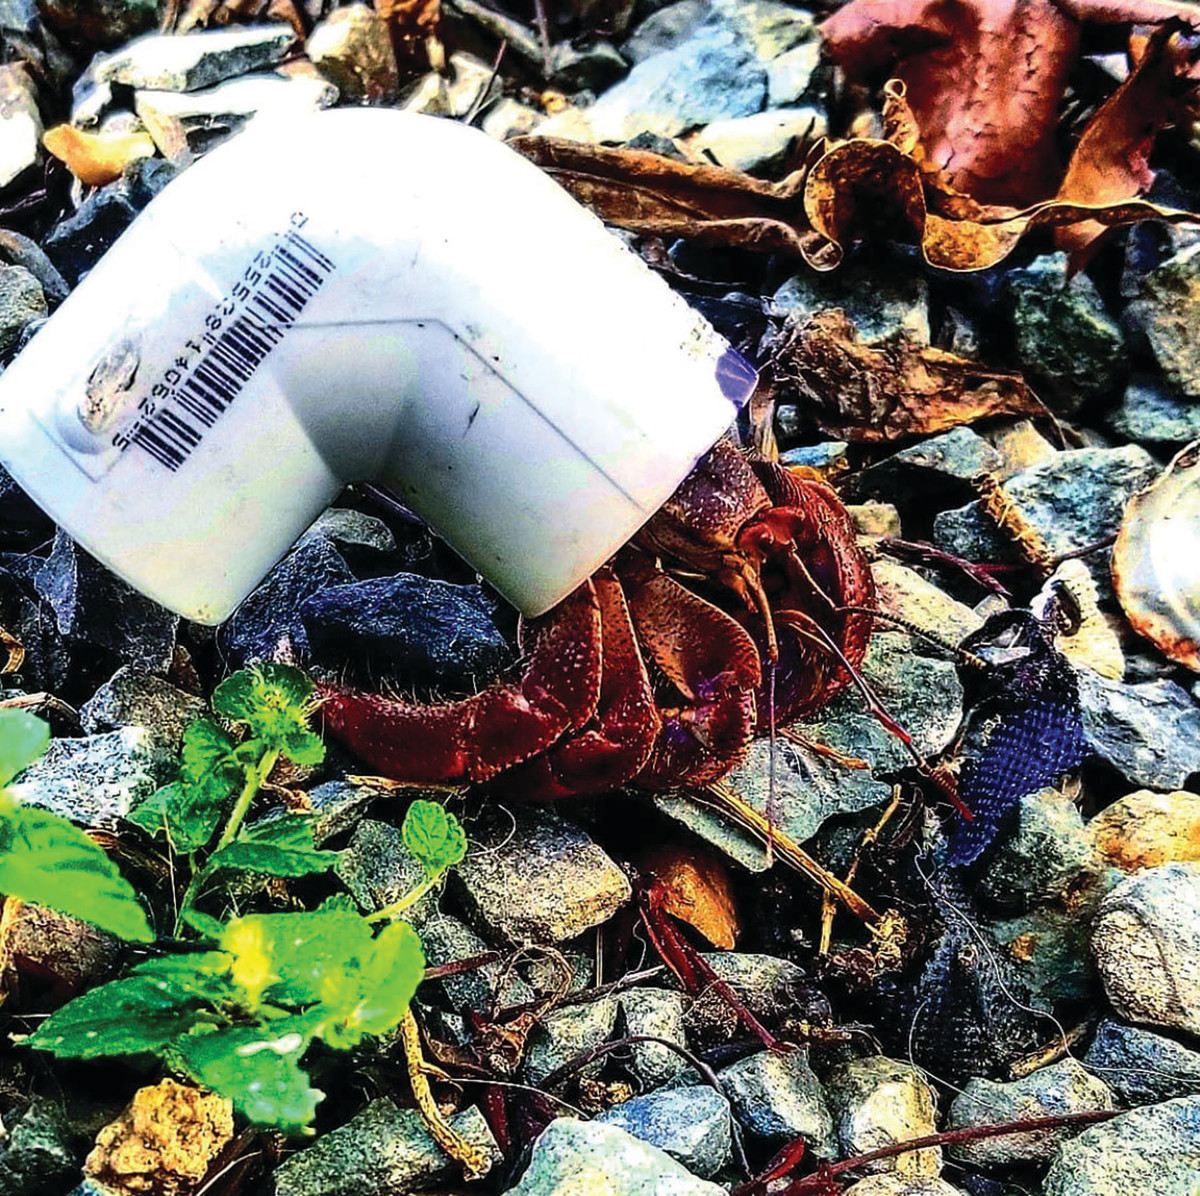 A hermit crab made a home from a PVC plumbing elbow. 